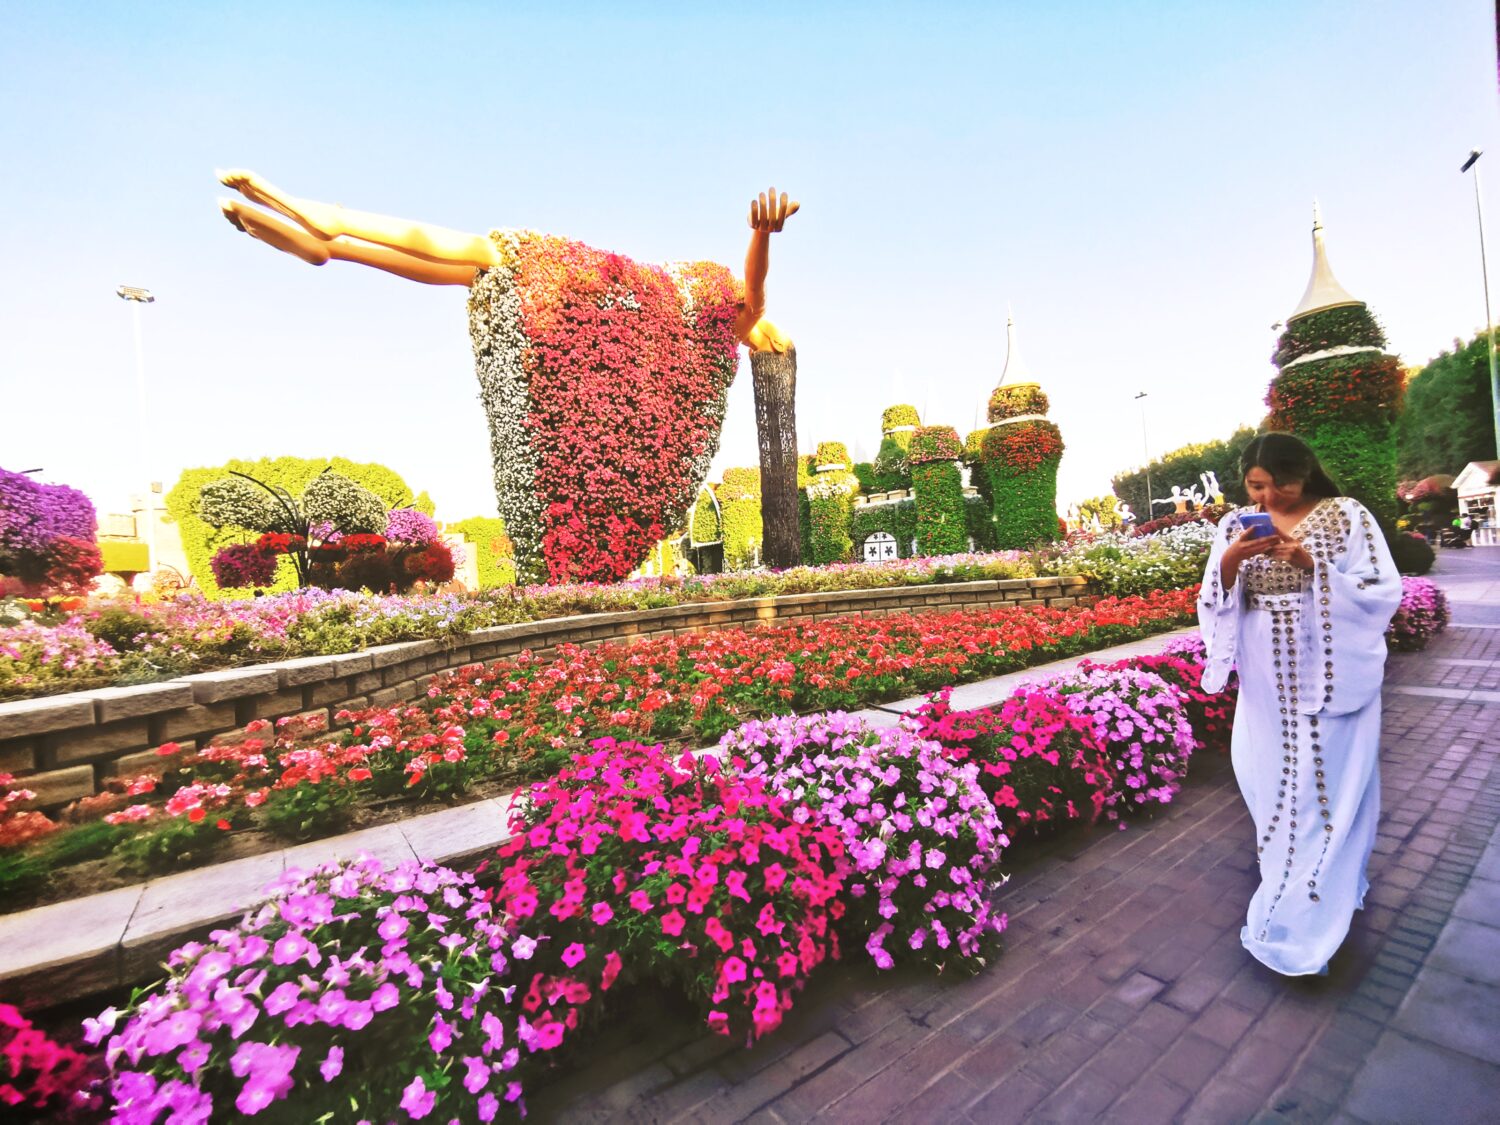 Dubai Top Attractions Tour With Entry Tickets